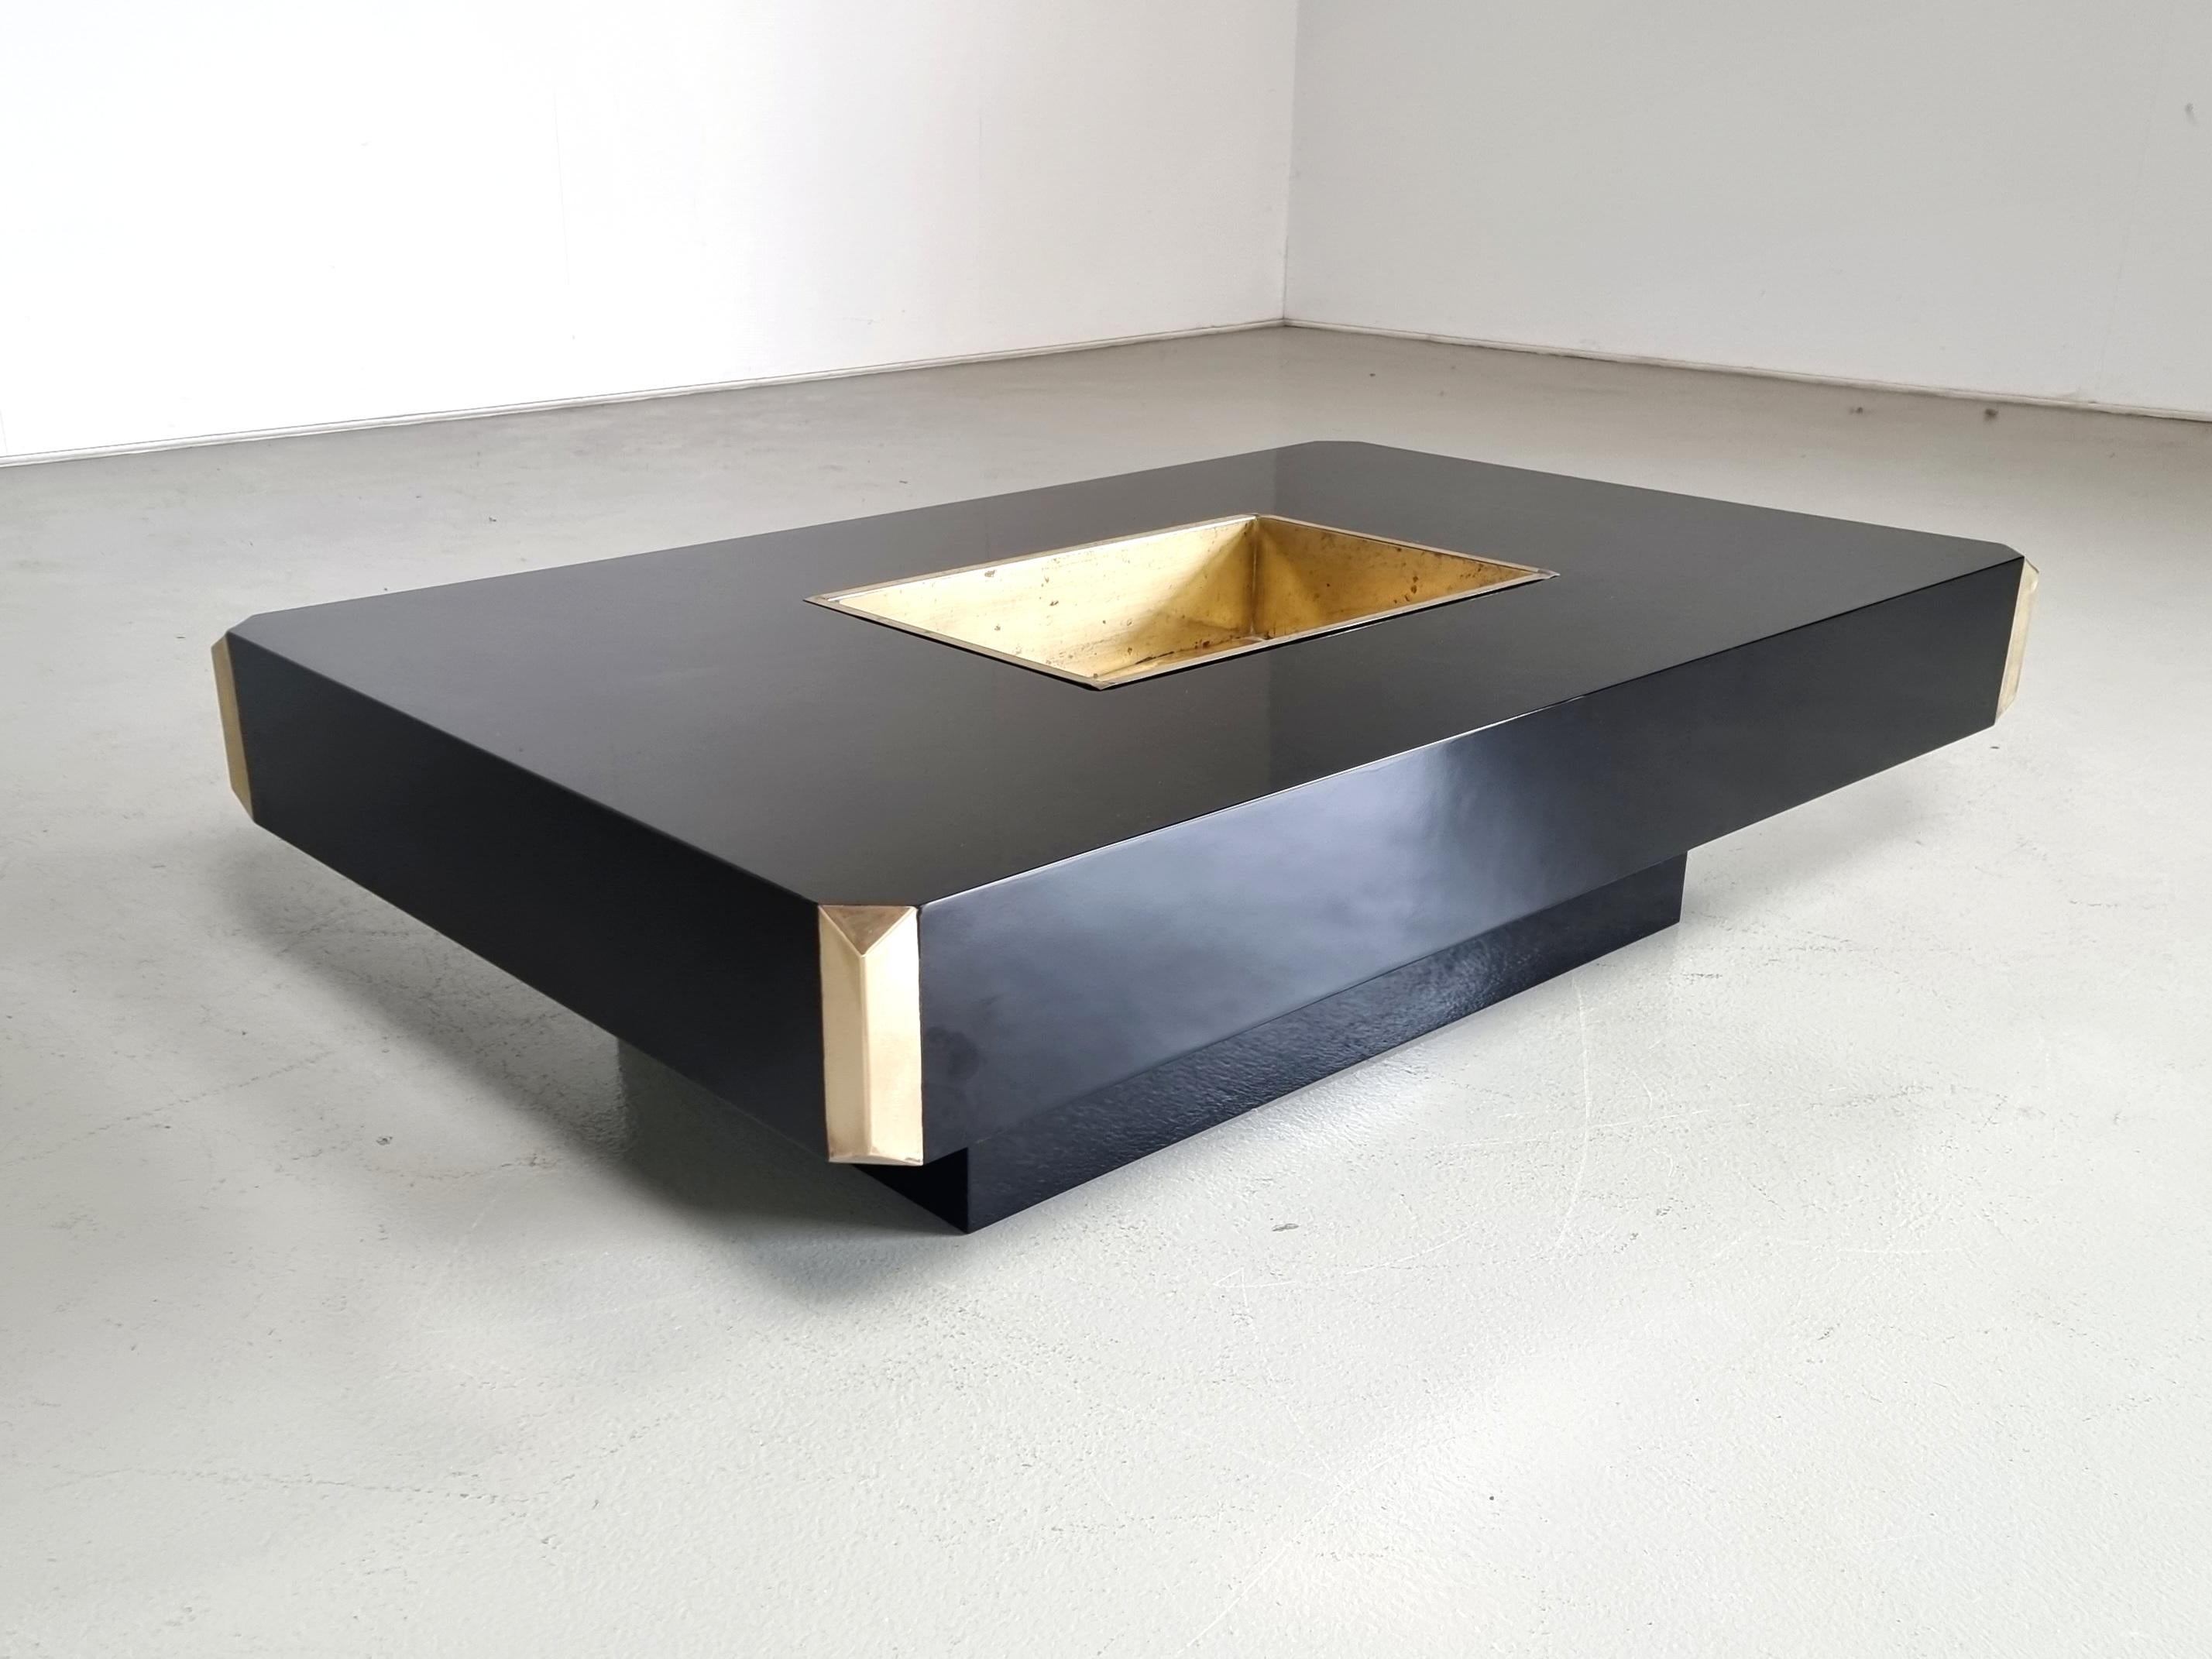 Exclusive and very rare brass edition coffee table Willy Rizzo for Mario Sabot from the 1970s

Made from gorgeous patinated Brass with a black lacquered wood base.
The recessed base creates the impression that the table is floating and lightens the